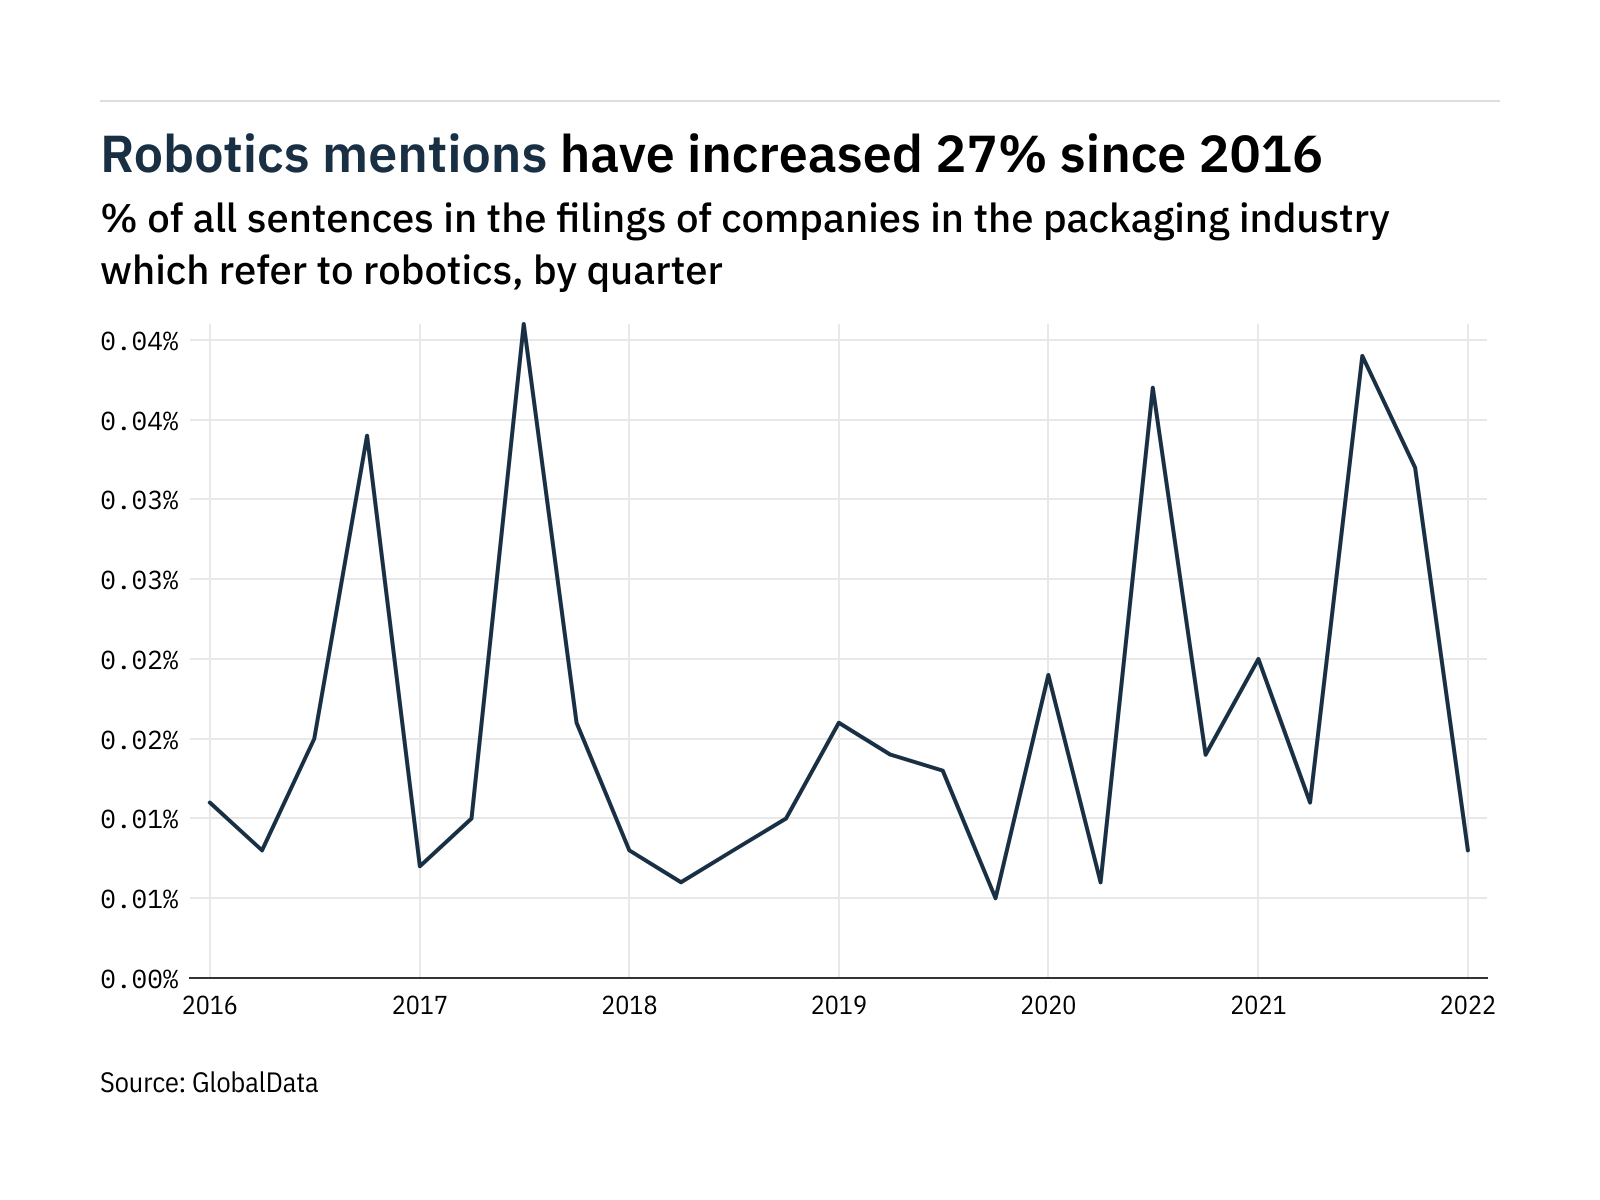 Filings buzz in the packaging industry: 75% decrease in robotics mentions in Q1 of 2022